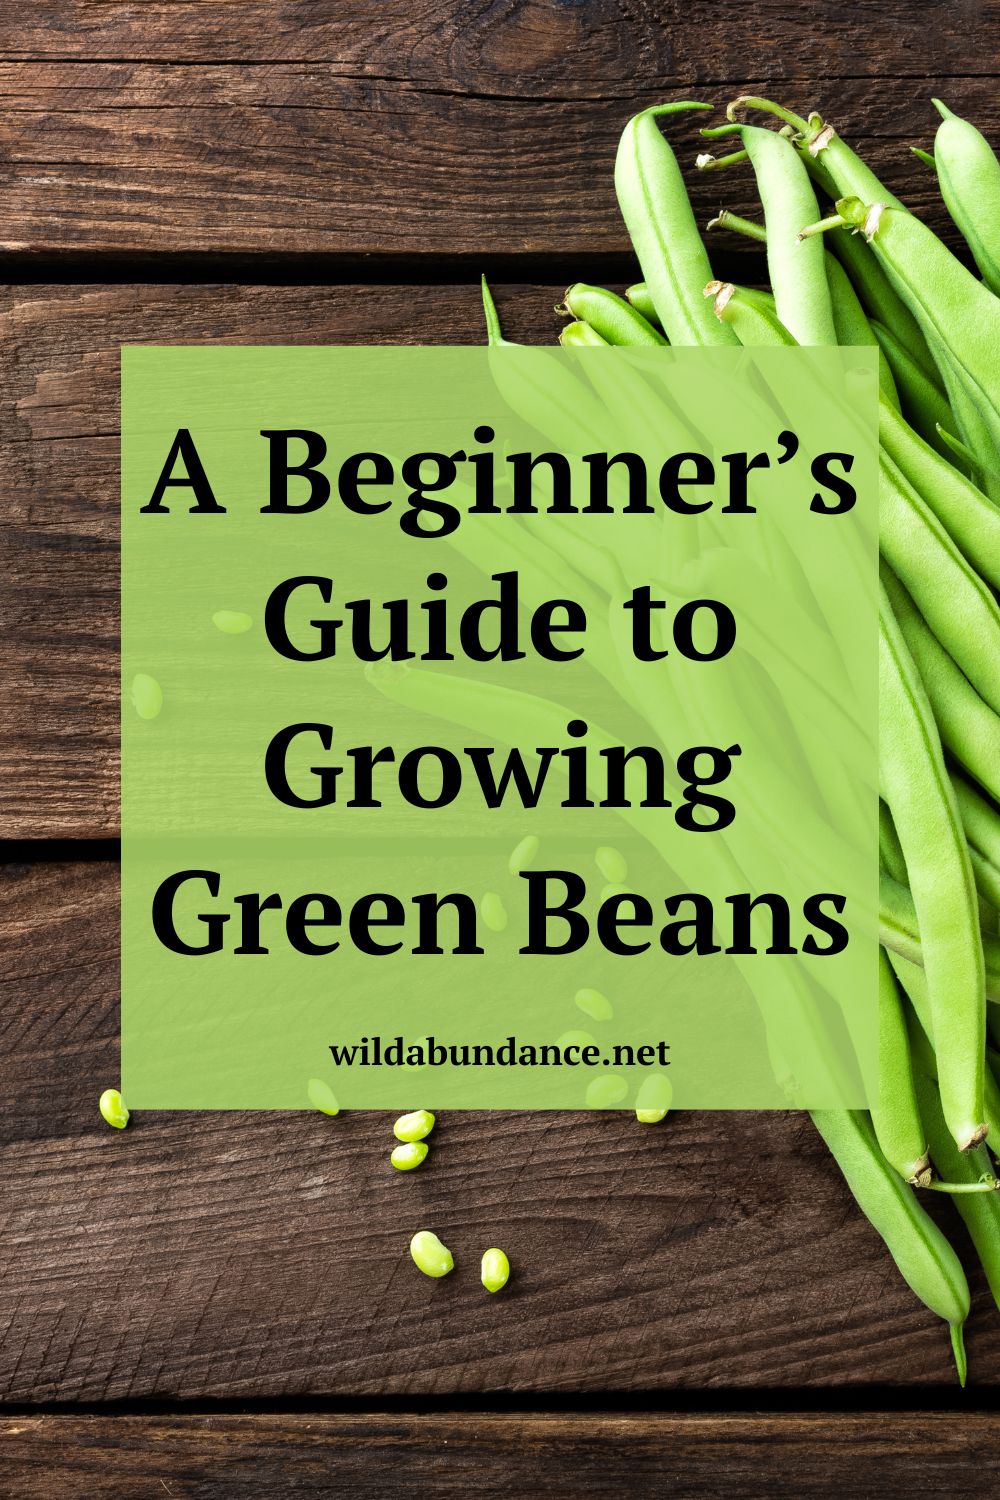 A Beginner’s Guide to Growing Green Beans